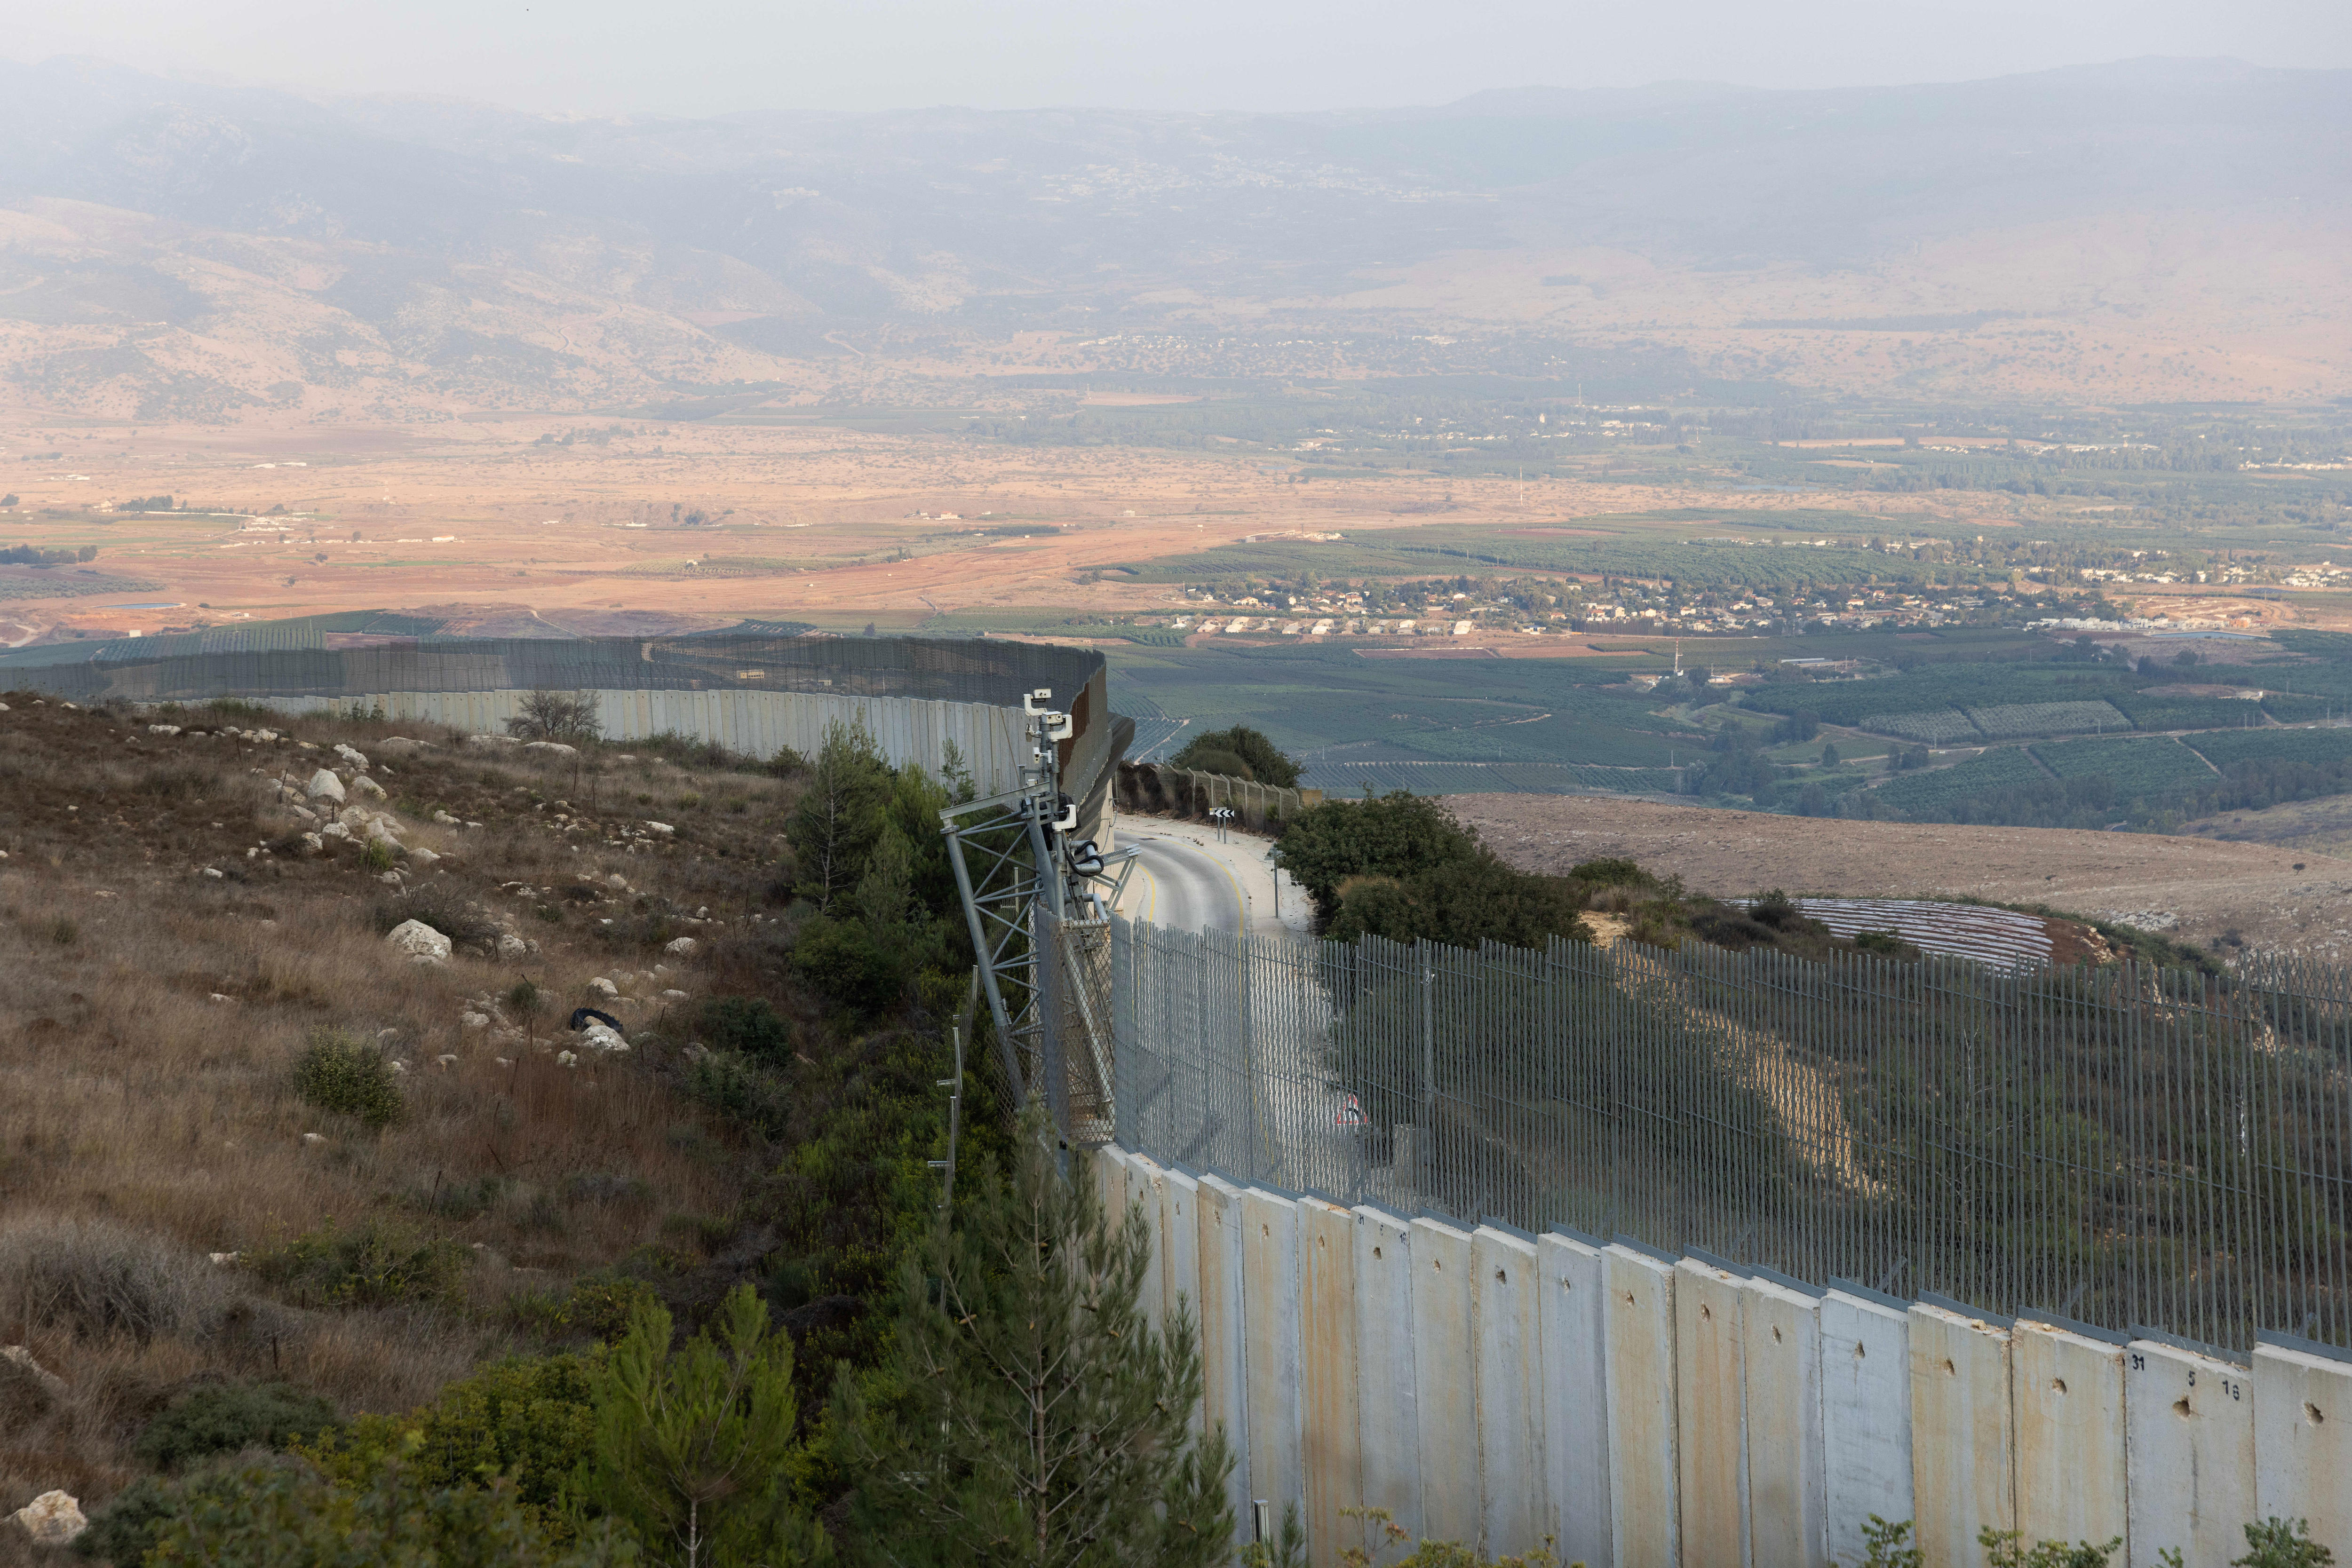 Israel-Lebanon boarder could become a flashpoint in Gaza war